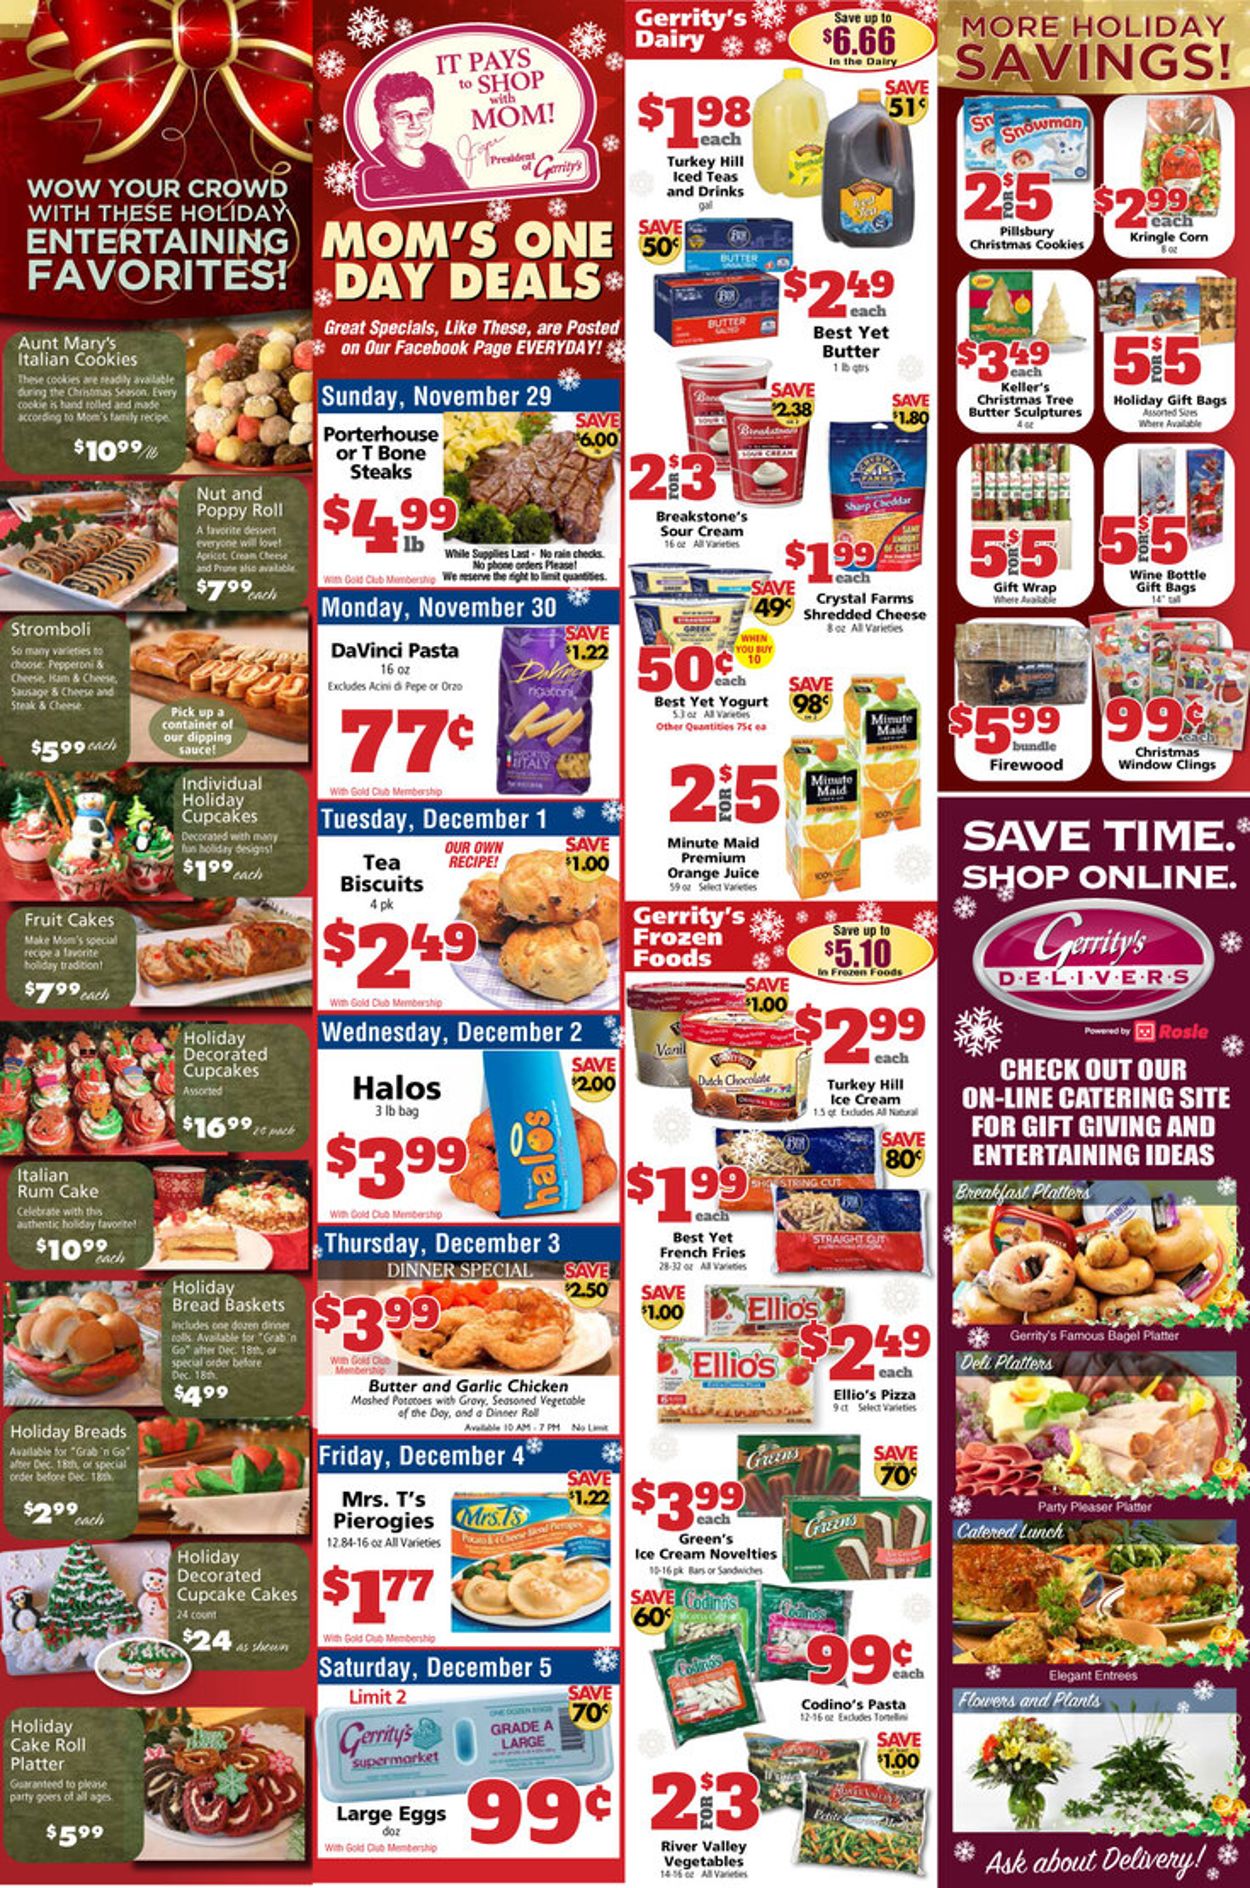 Gerrity's Supermarkets - Cyber Monday 2020 Weekly Ad Circular - valid 11/29-12/05/2020 (Page 5)